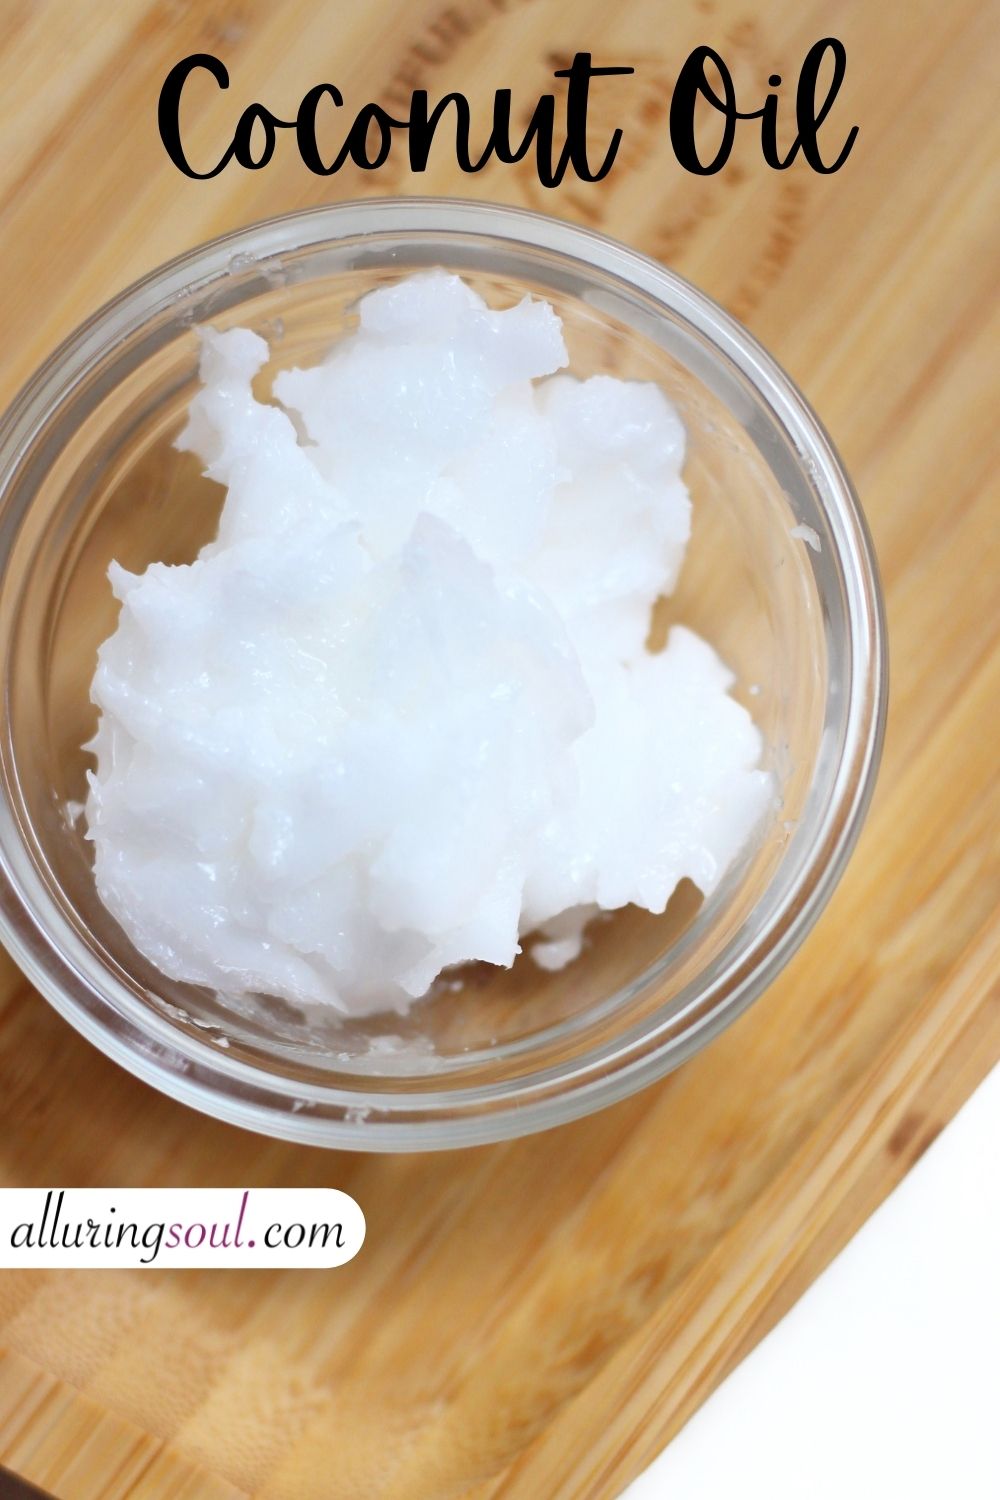 Shea Butter Vs Coconut Oil (And Which is best for Moisturiser?)